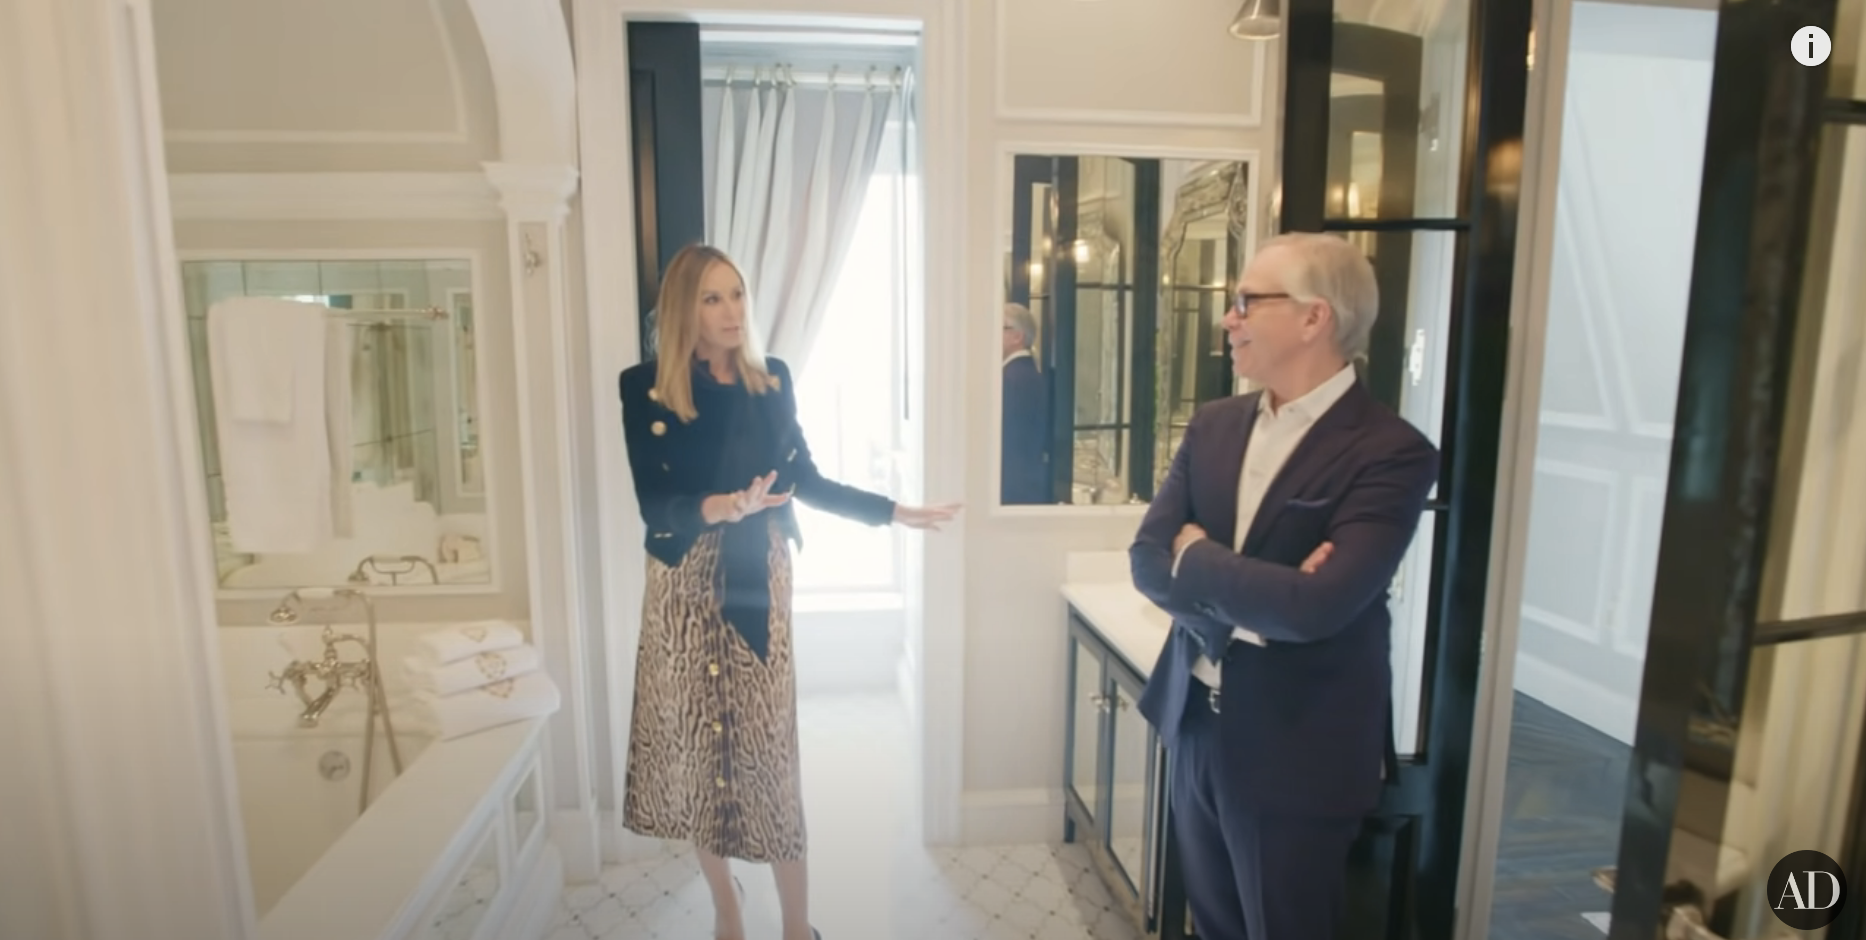 Tommy Hilfiger and his wife in their bathroom